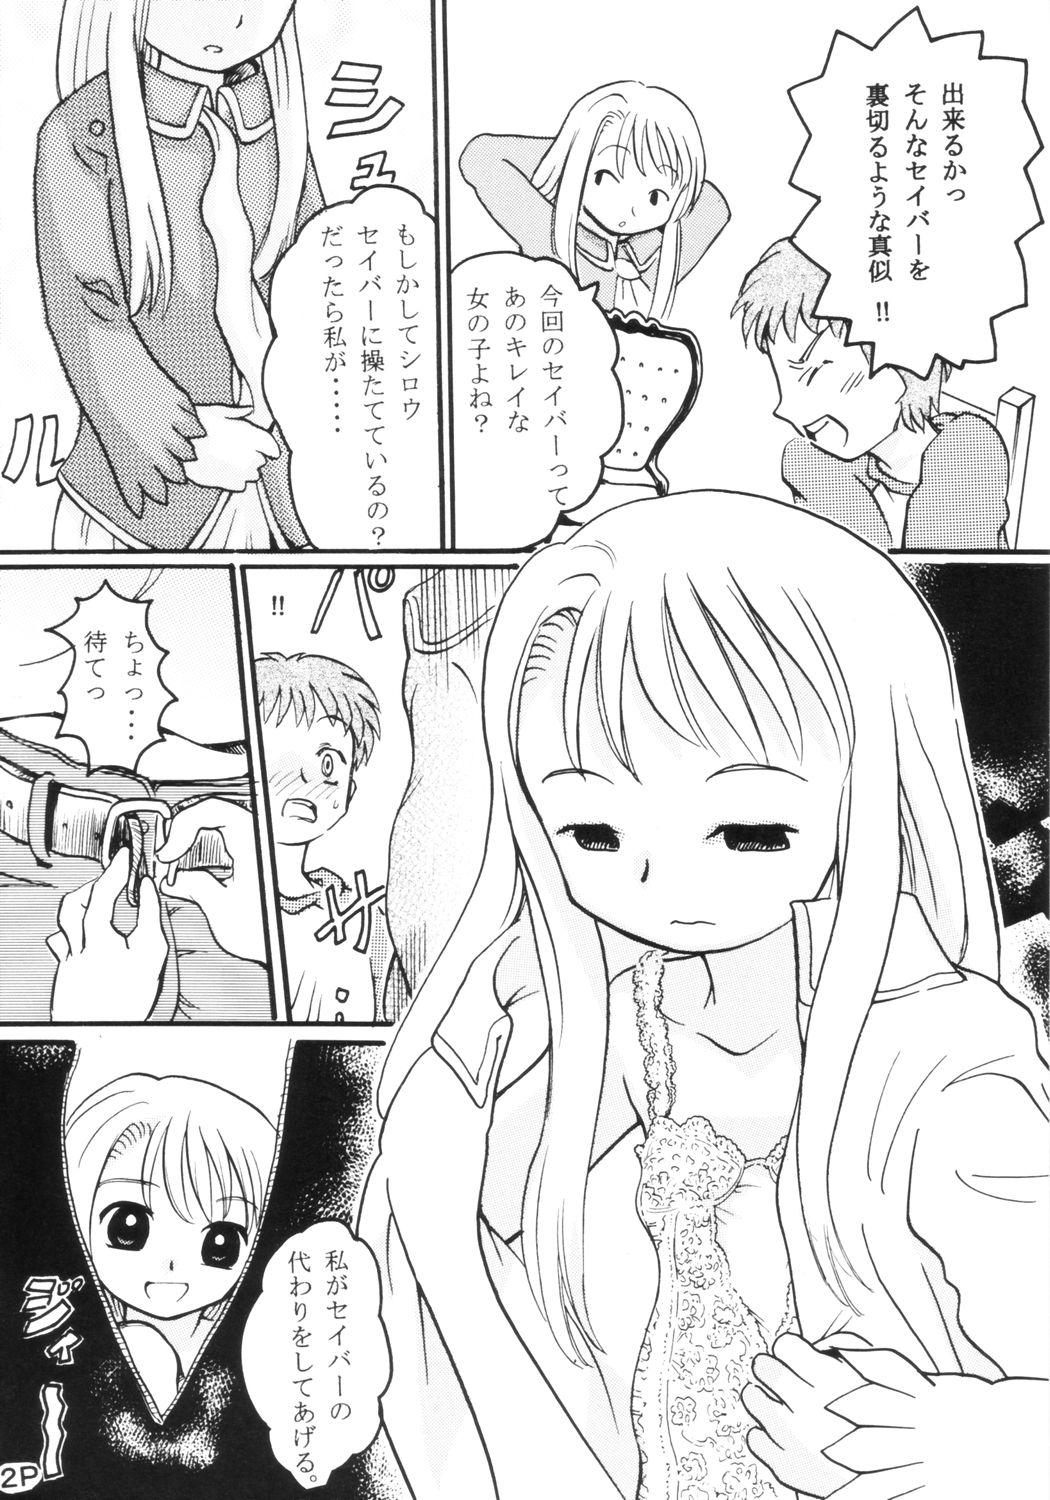 Movie Fate Stay Night Fan Book Vol. 1 - Fate stay night Jerk Off Instruction - Page 3